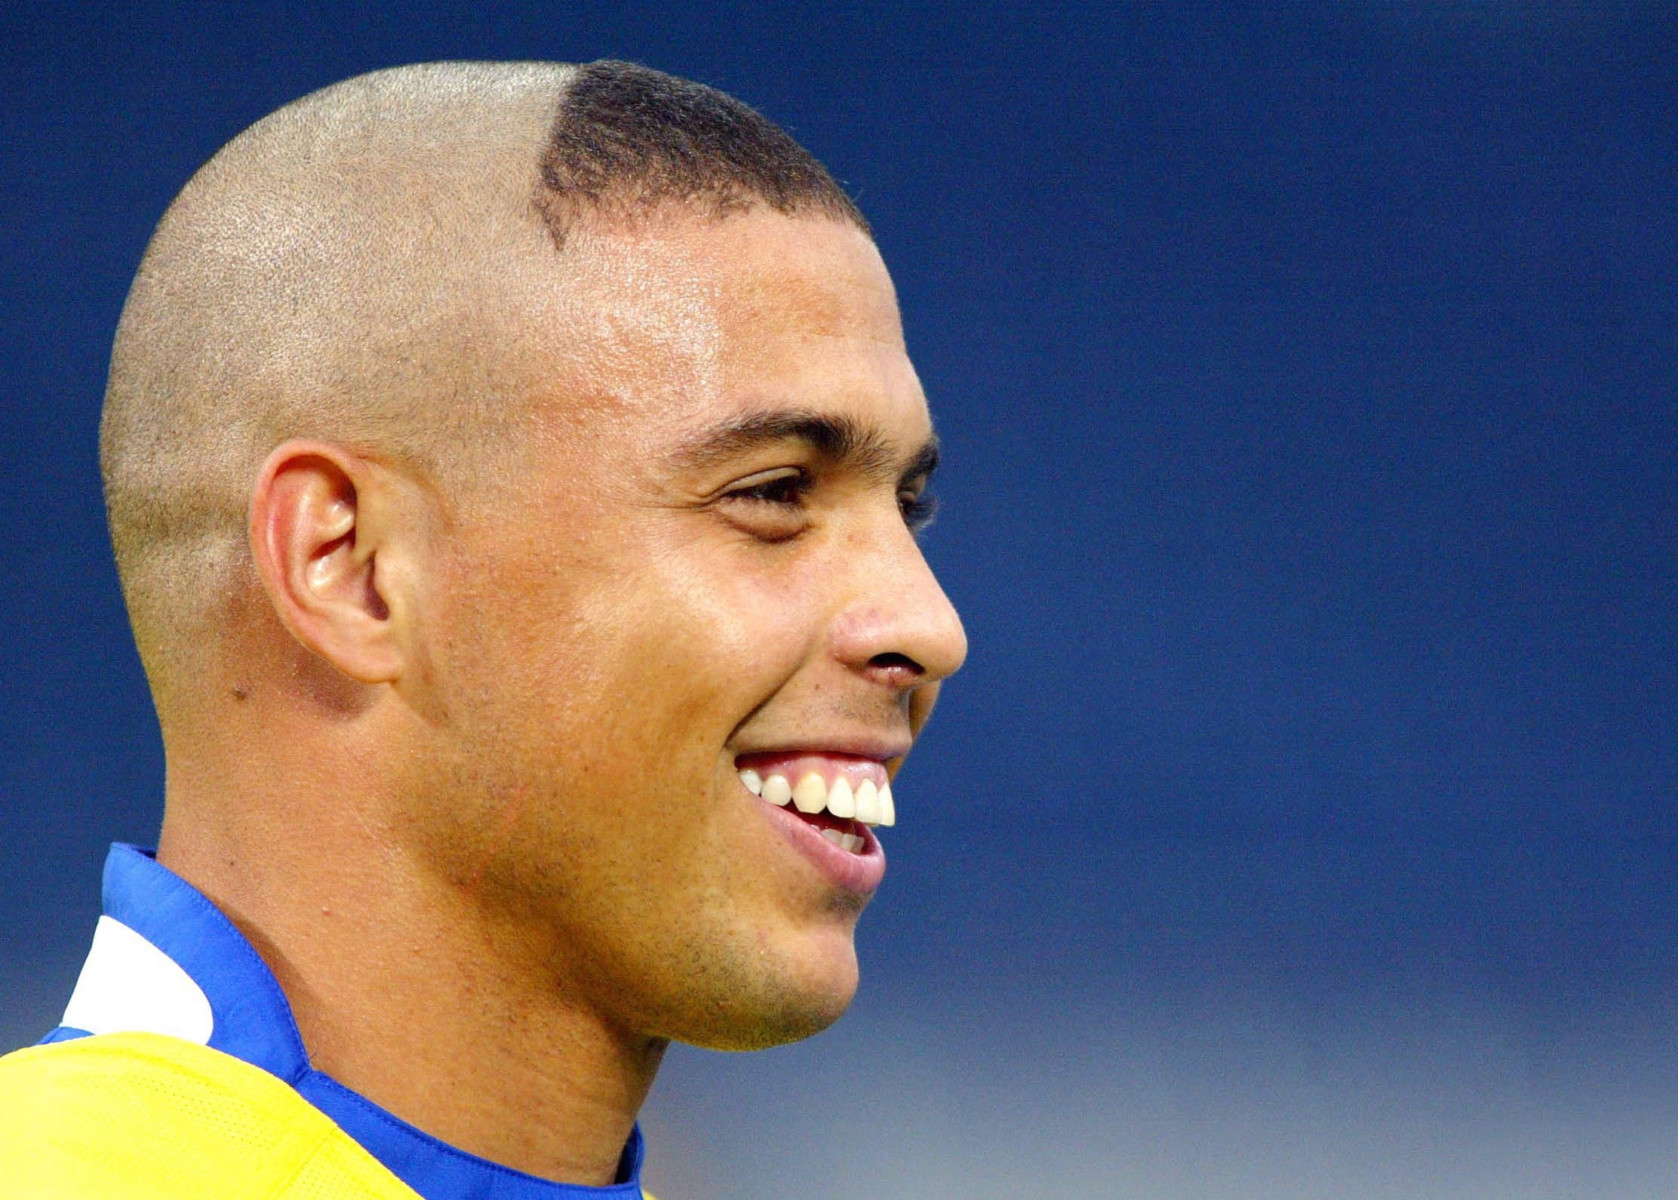 Young Chelsea fan devastated after getting wrong Ronaldo haircut having